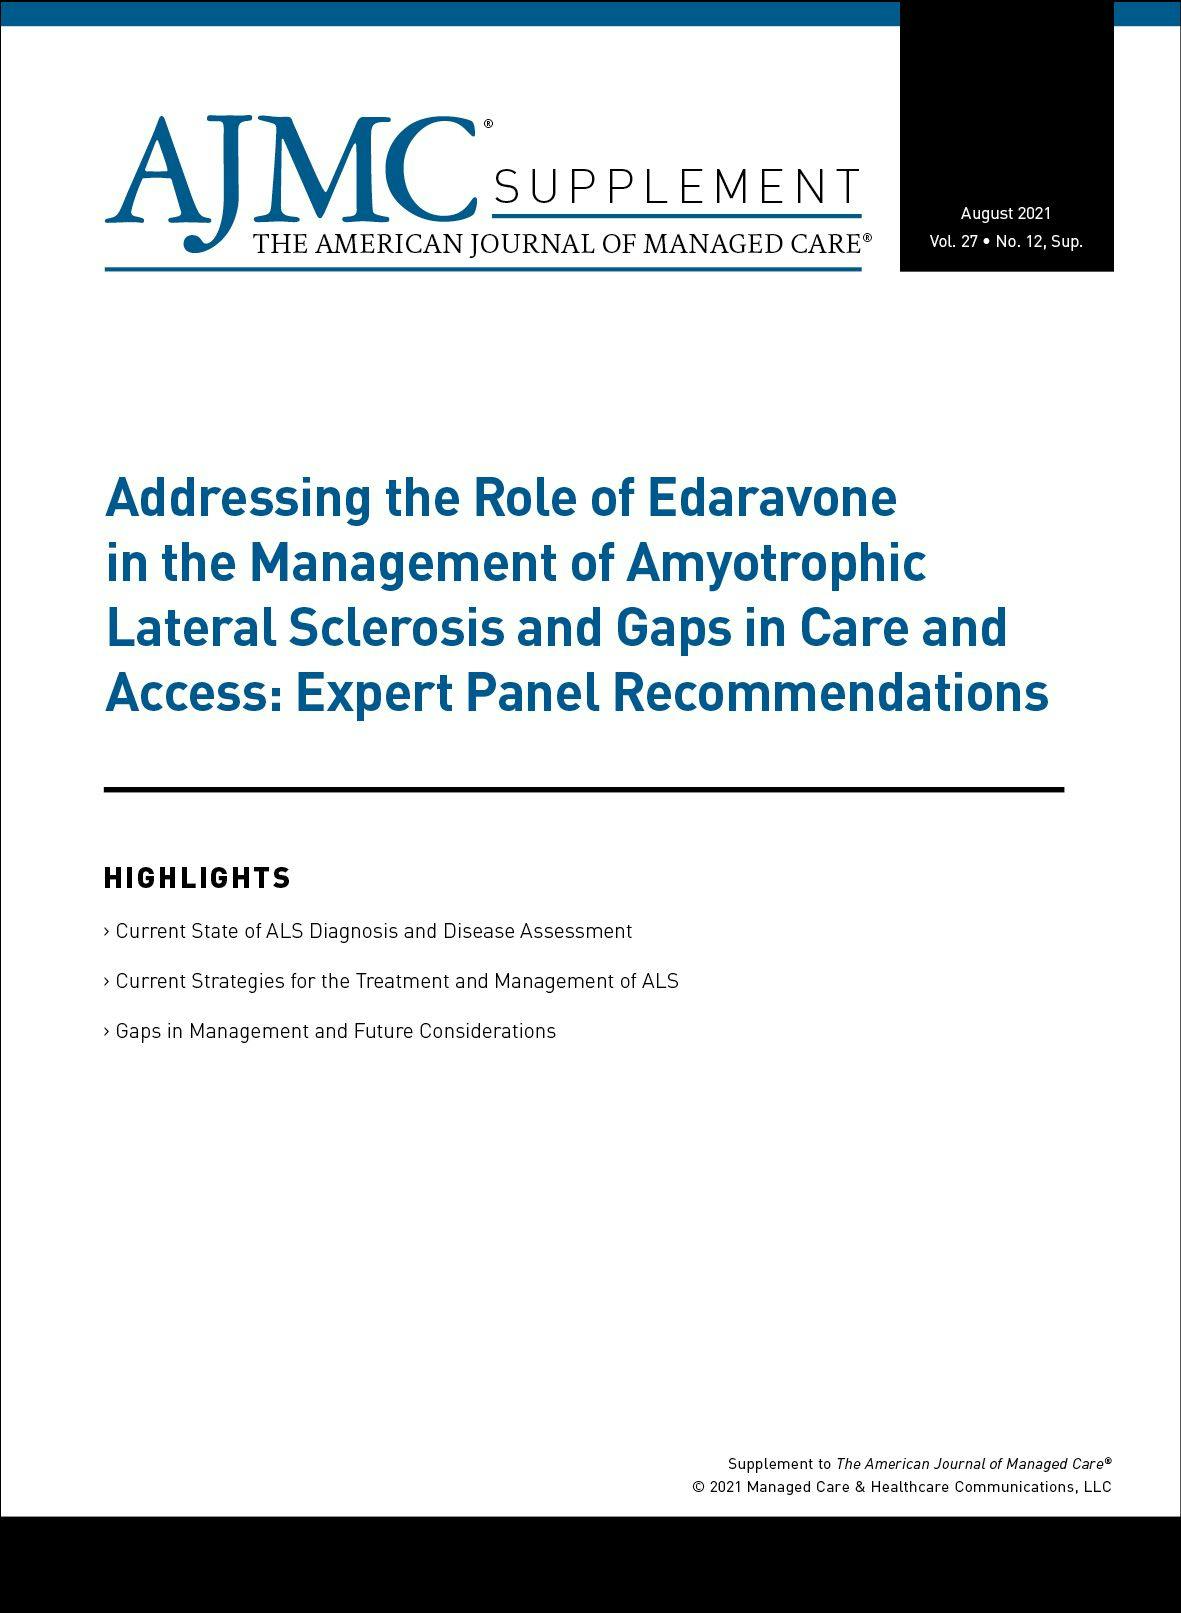 Addressing the Role of Edaravone in the Management of Amyotrophic Lateral Sclerosis and Gaps in Care and Access: Expert Panel Recommendations